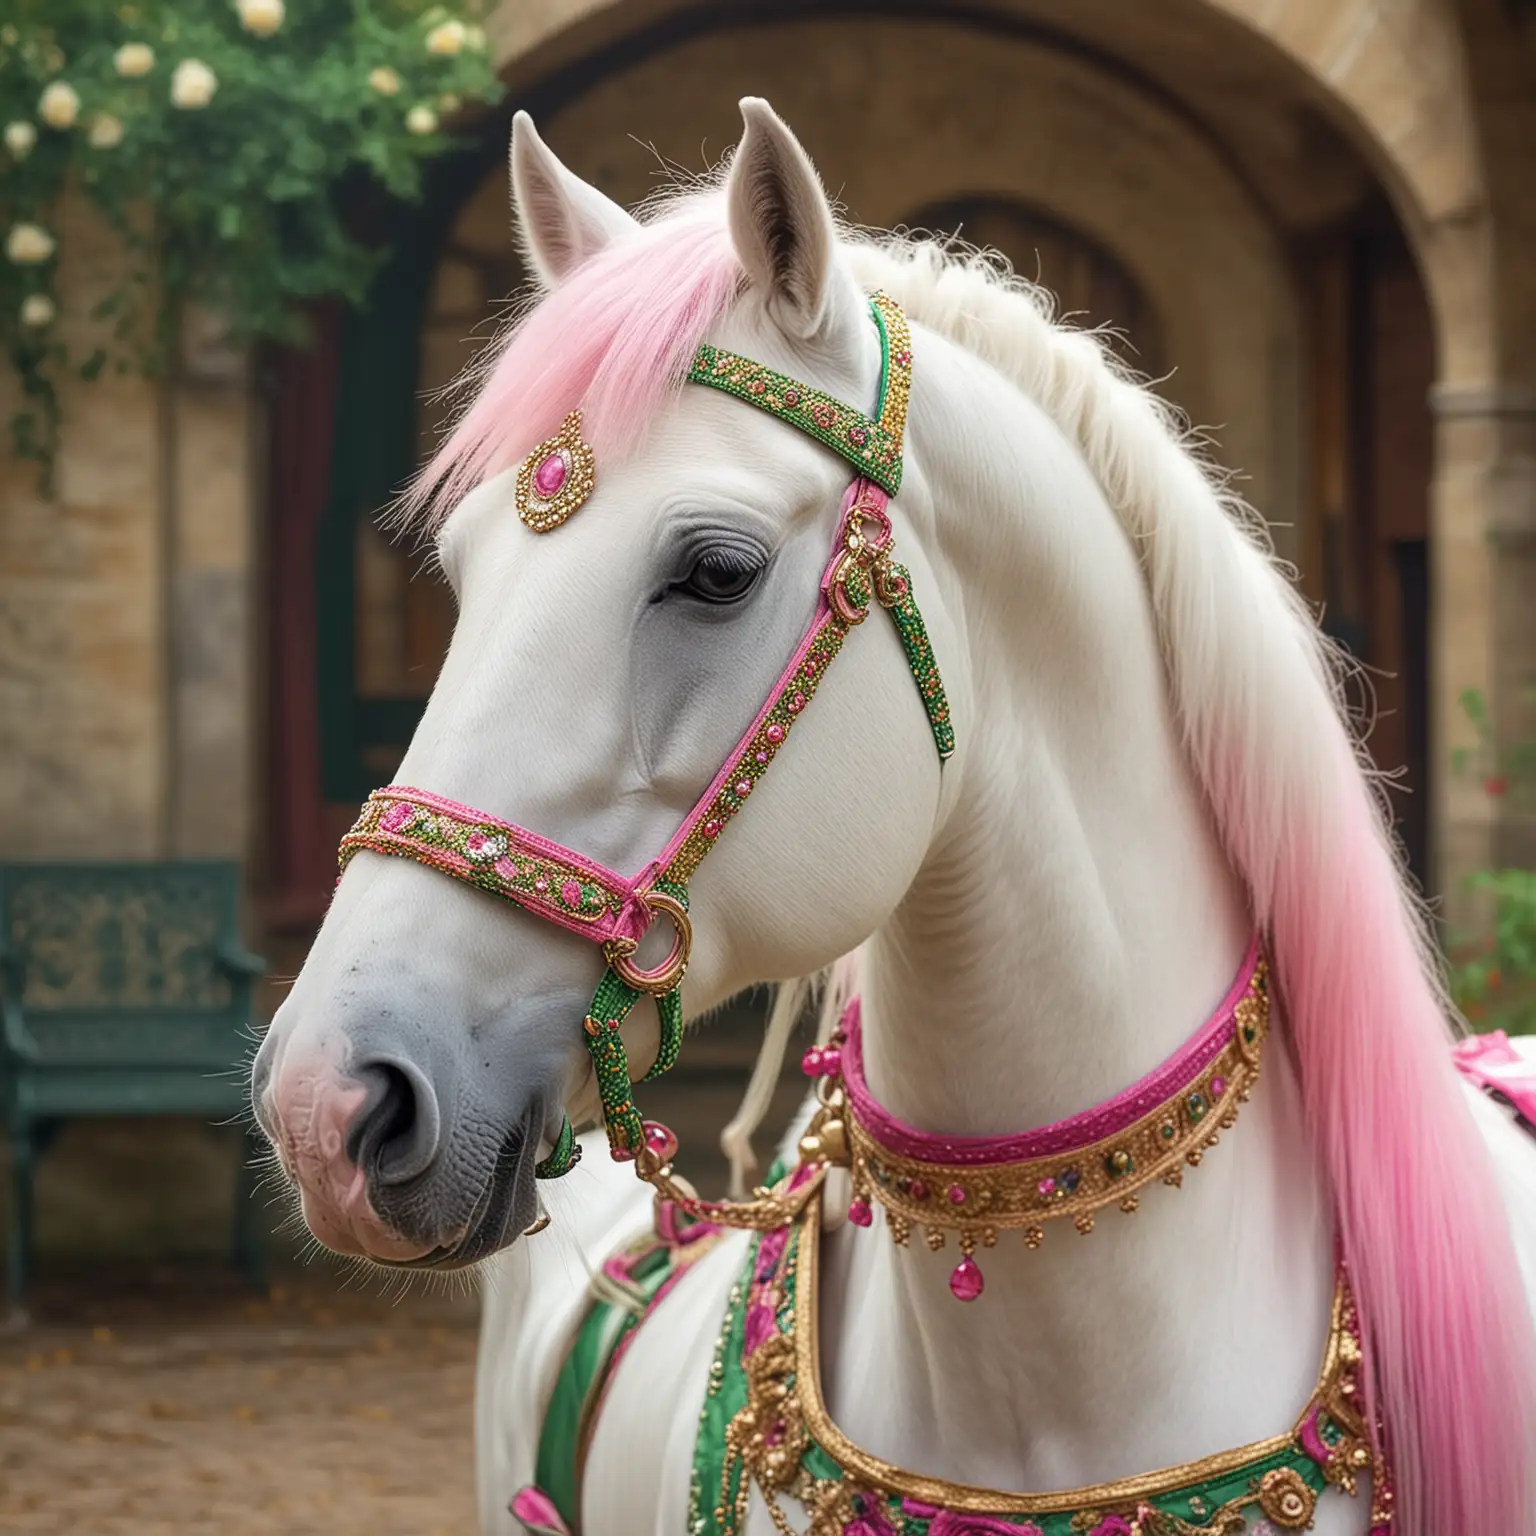 A white fairytale horse looking very smart, showing off it’s new costume in green and pink , drama queen, adorable, in a fantasy setting, vivid colors